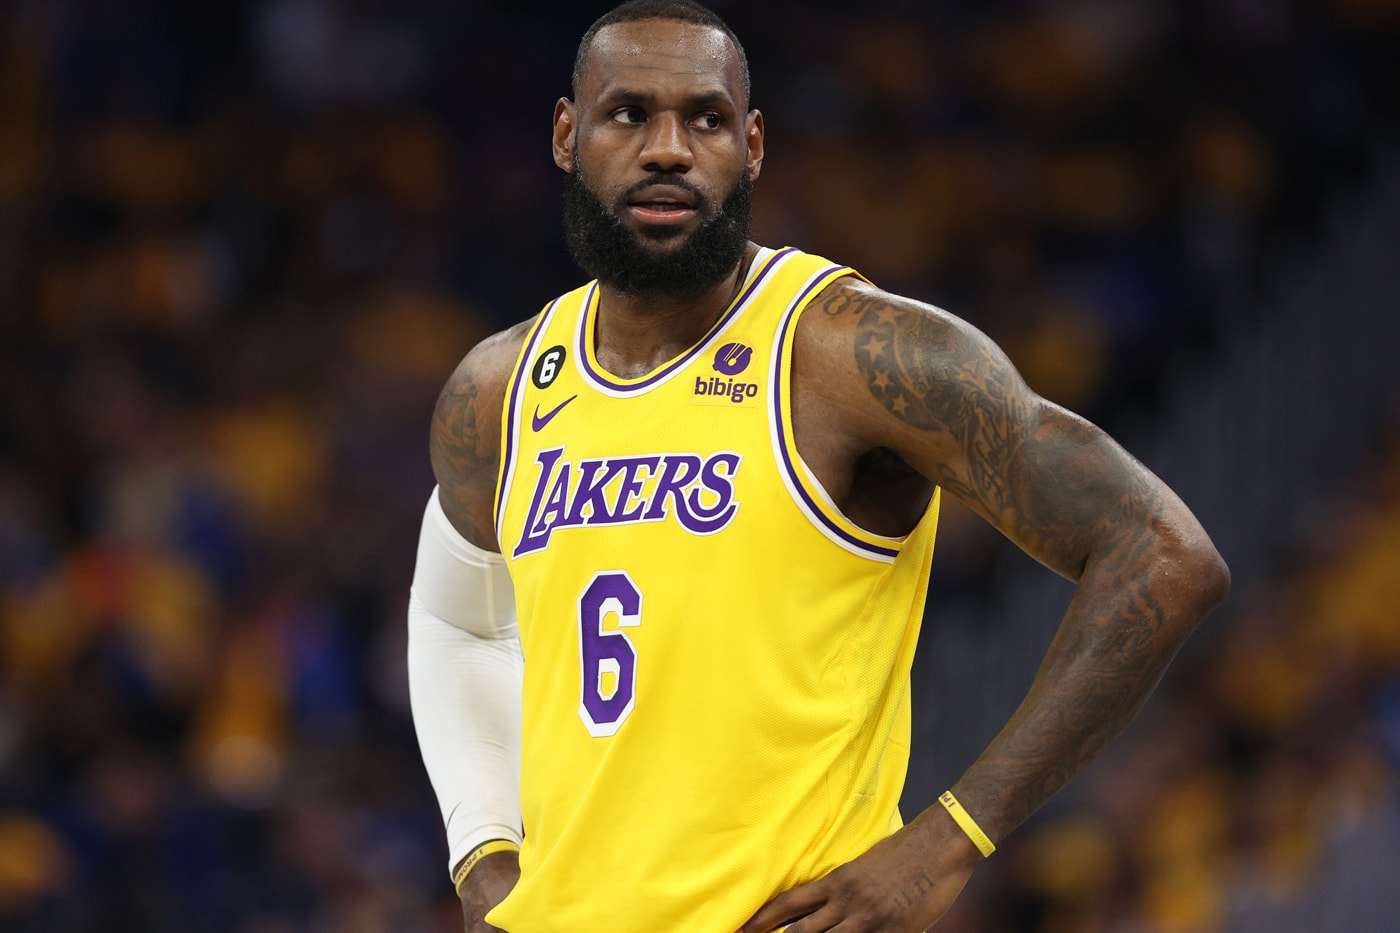 LeBron James Confirms He Is Not Retiring, Announcing His Return for a 21st NBA Season los angeles lakers basketball espys la king james